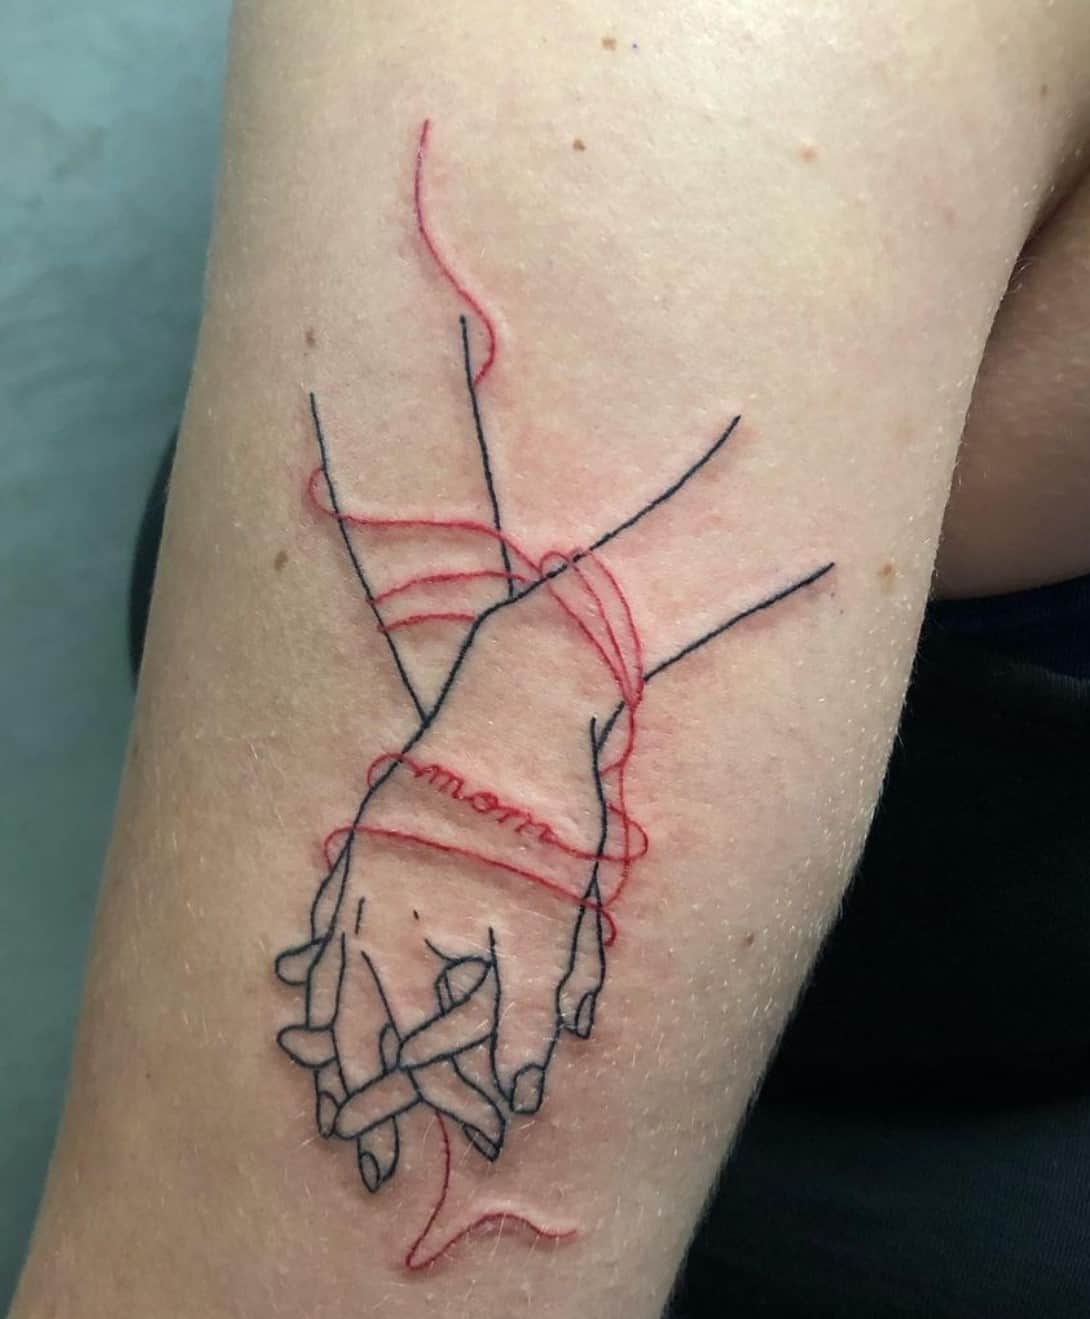 Connected by mom’s love tattoo